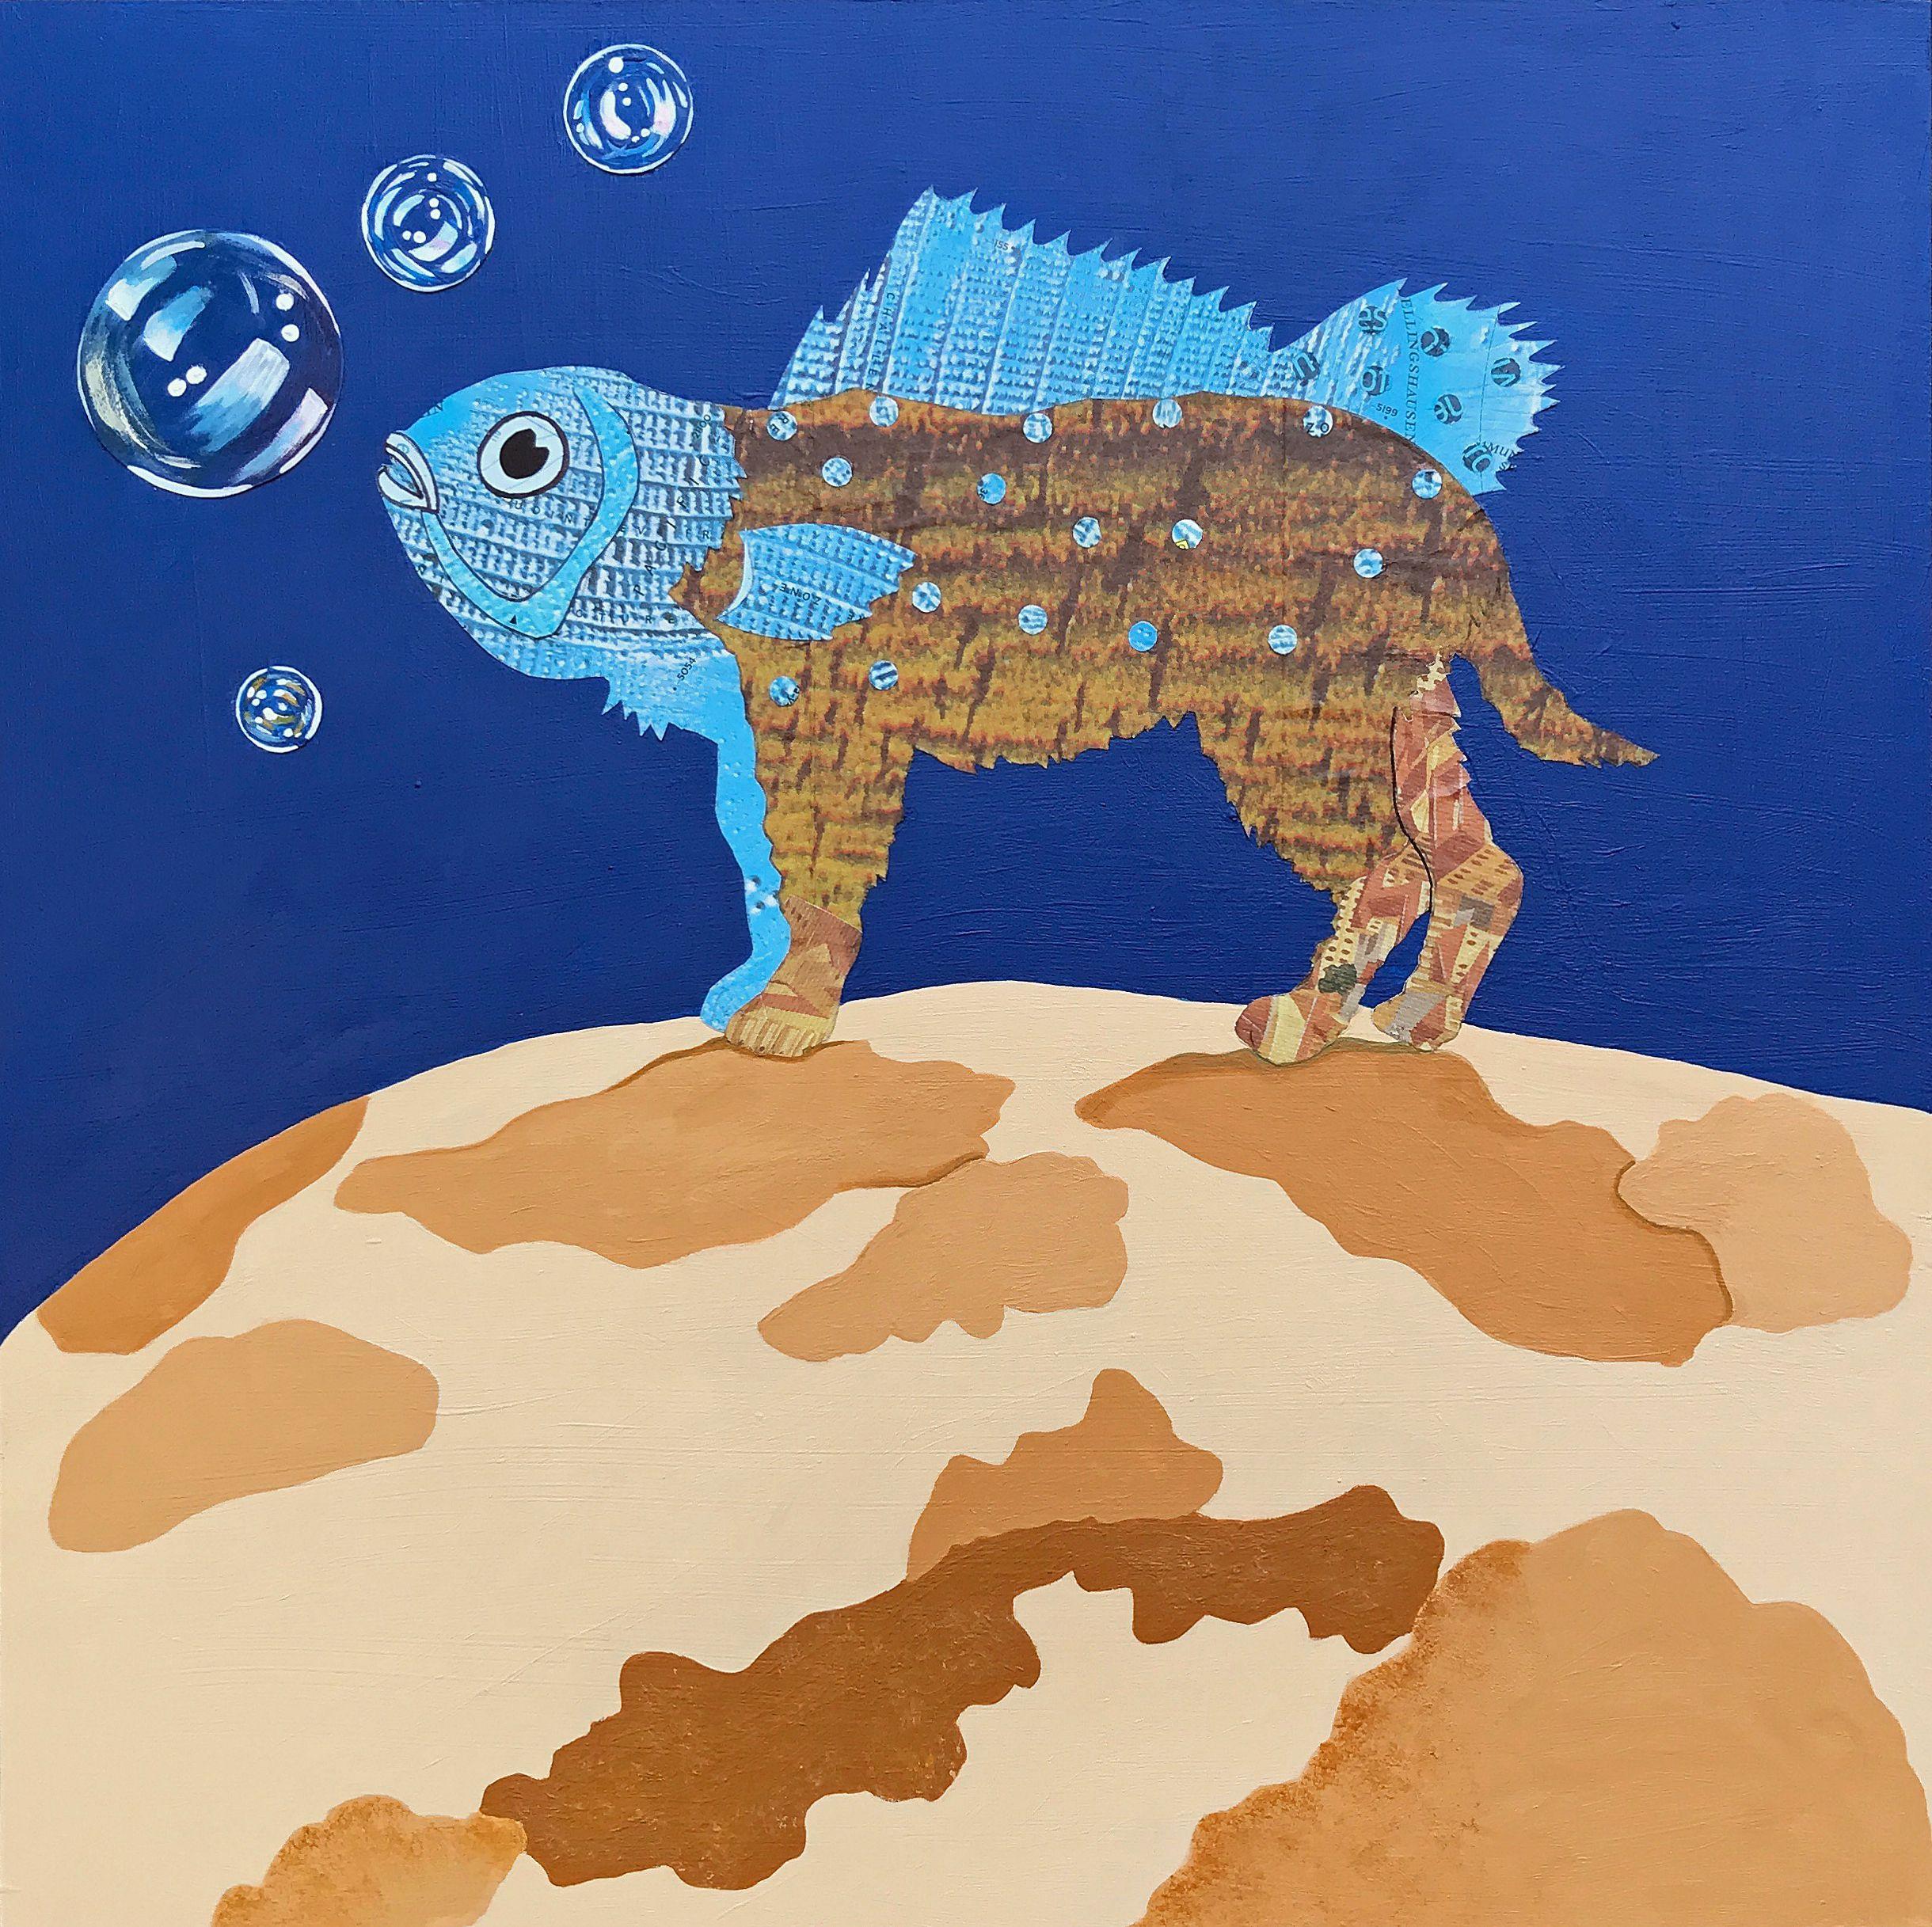 Hybrids Make the Best Pets, Mixed Media on Wood Panel - Mixed Media Art by Nancy Goodman Lawrence